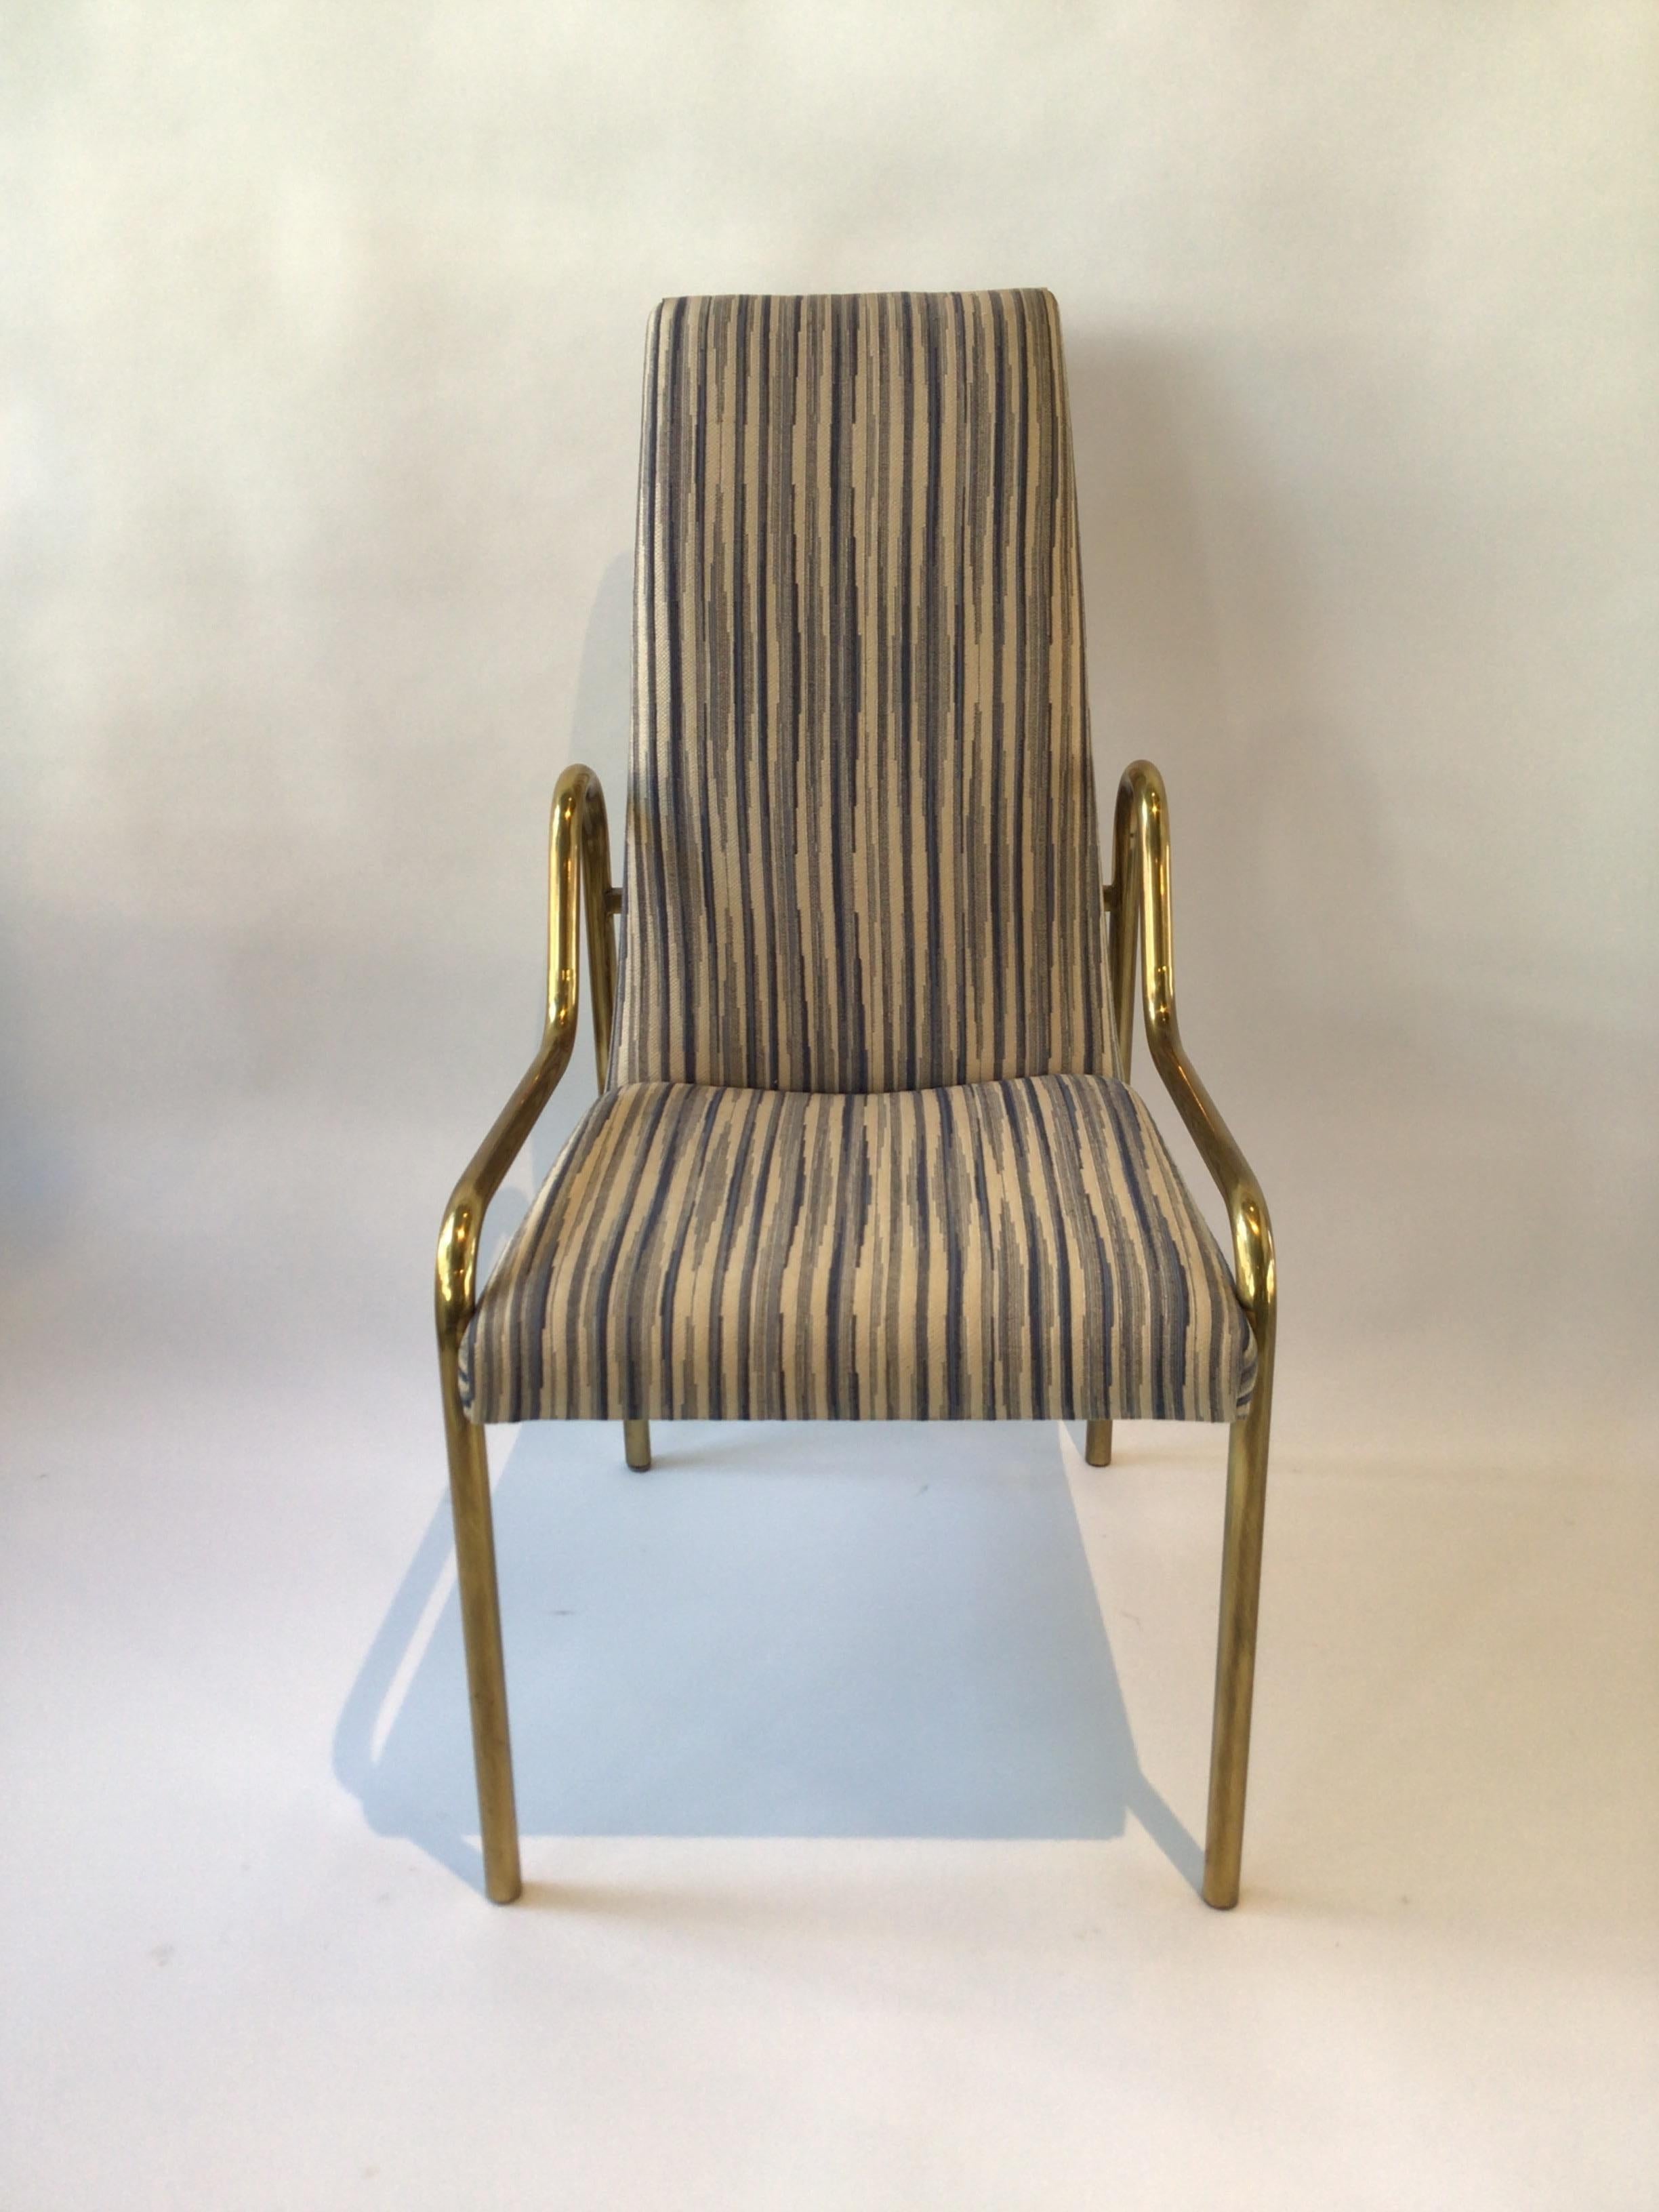 4 Brass Mastercraft Dining Chairs In Good Condition For Sale In Tarrytown, NY